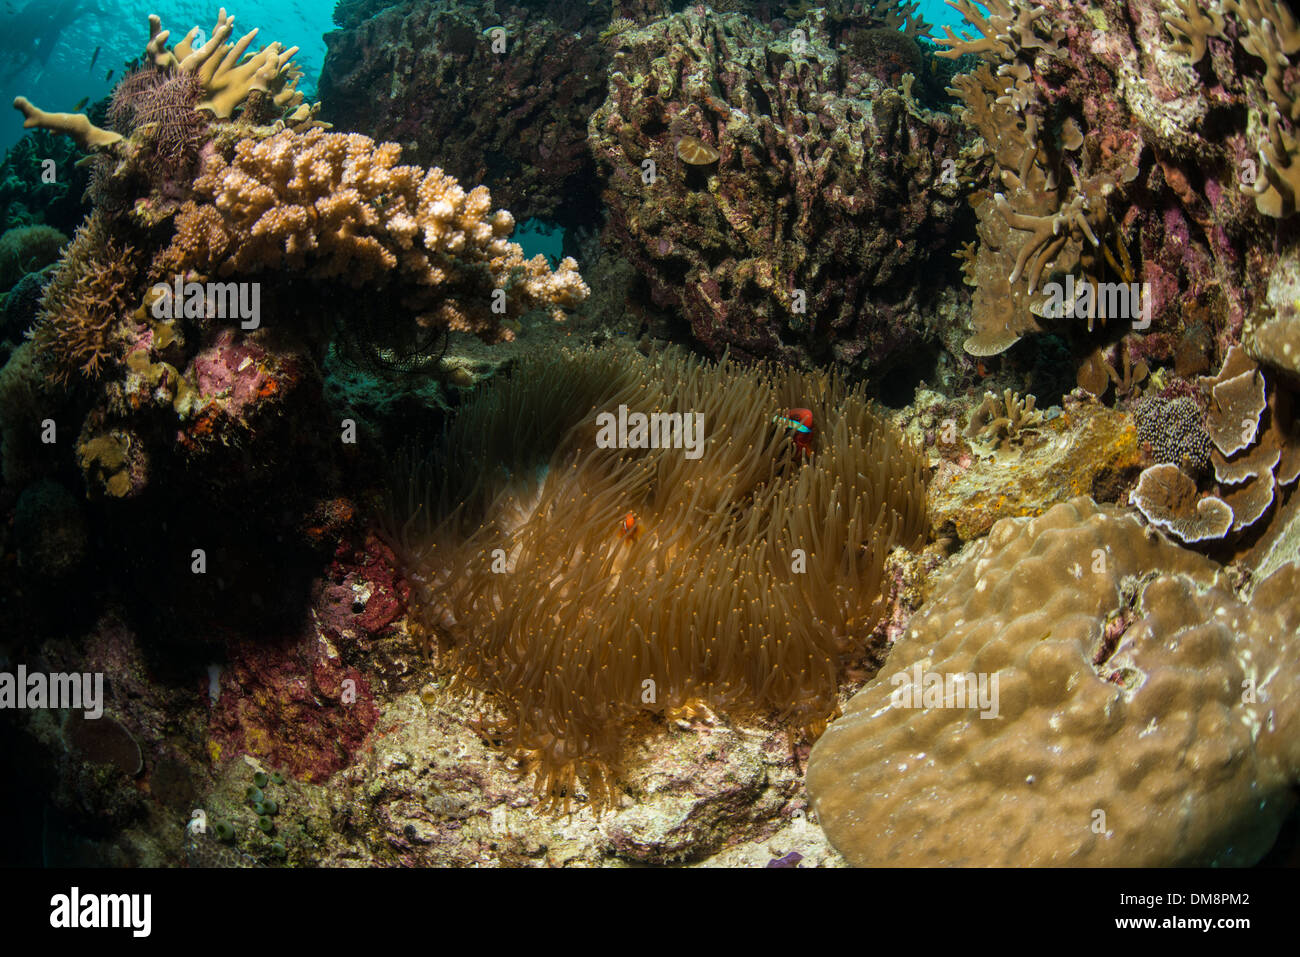 Underwater landscape with corals, anemone, and fish Stock Photo